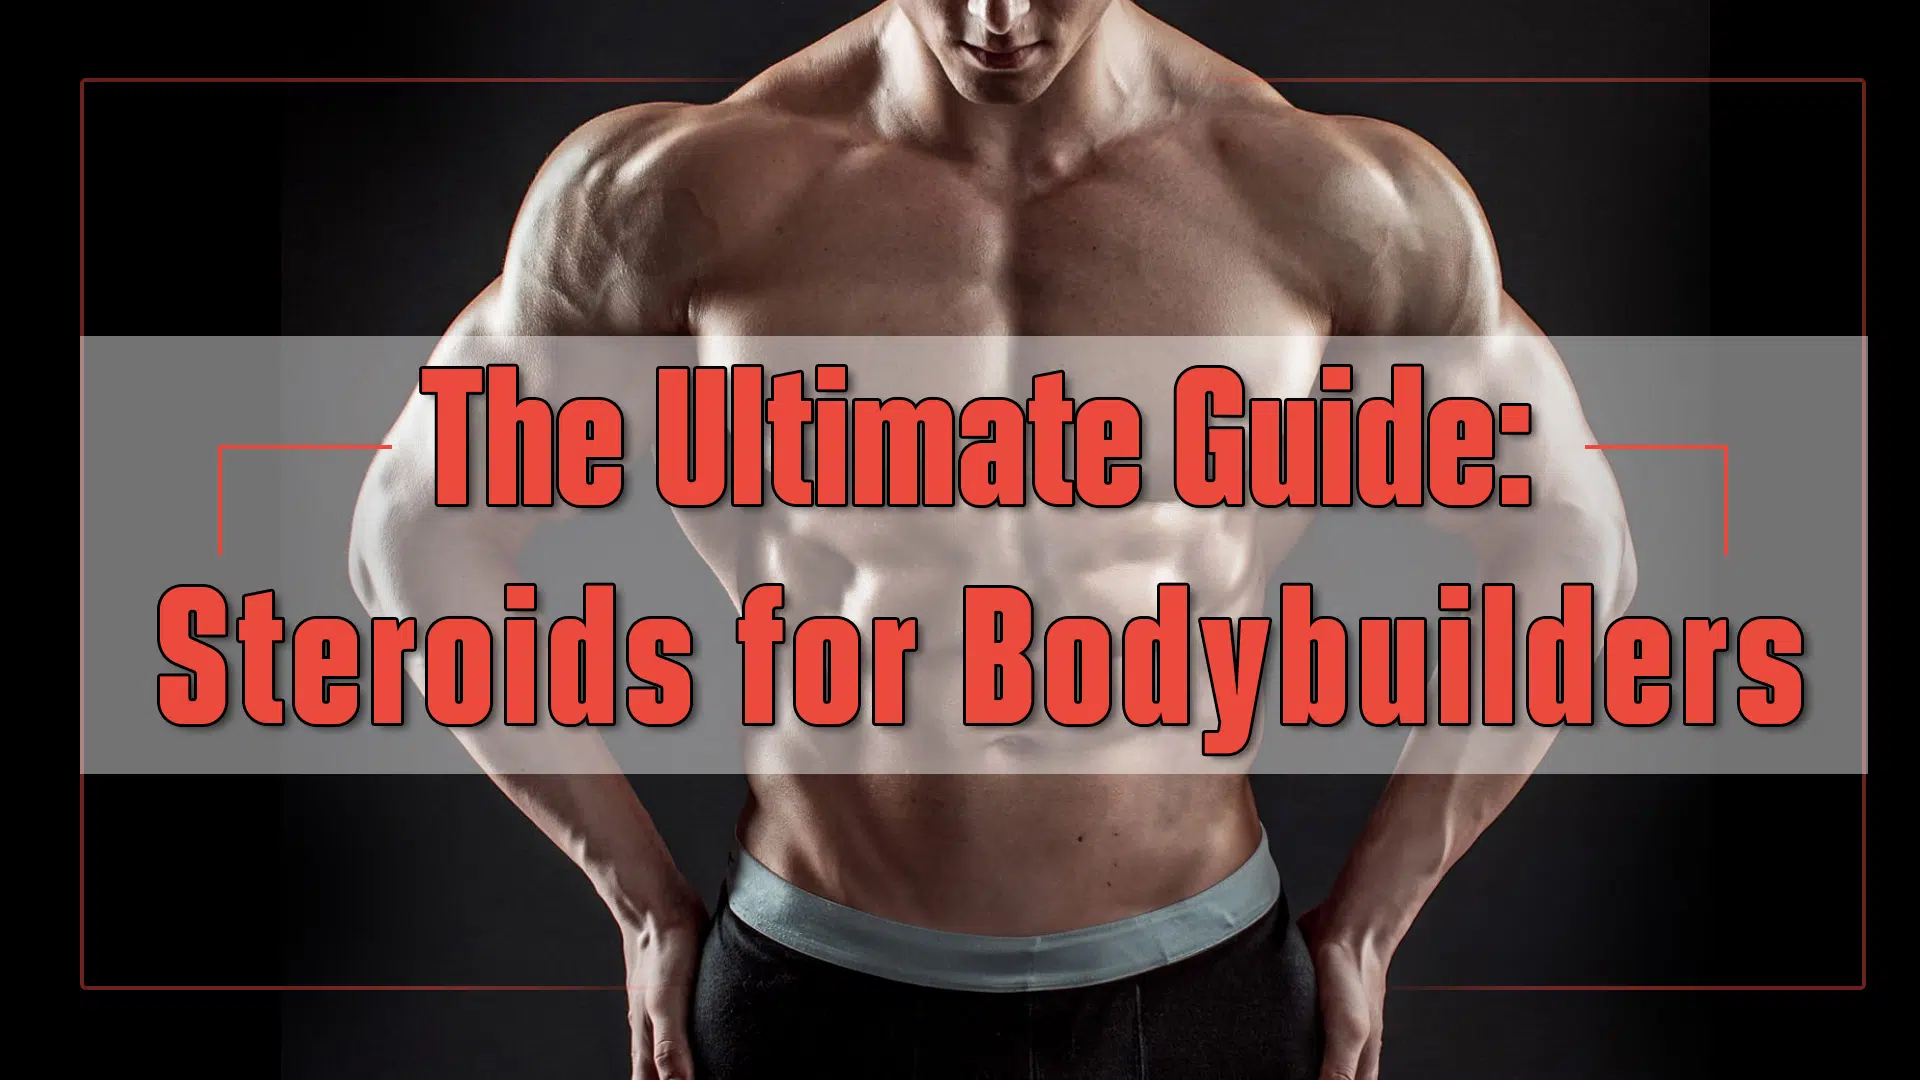 The Ultimate Guide: Steroids for Bodybuilders